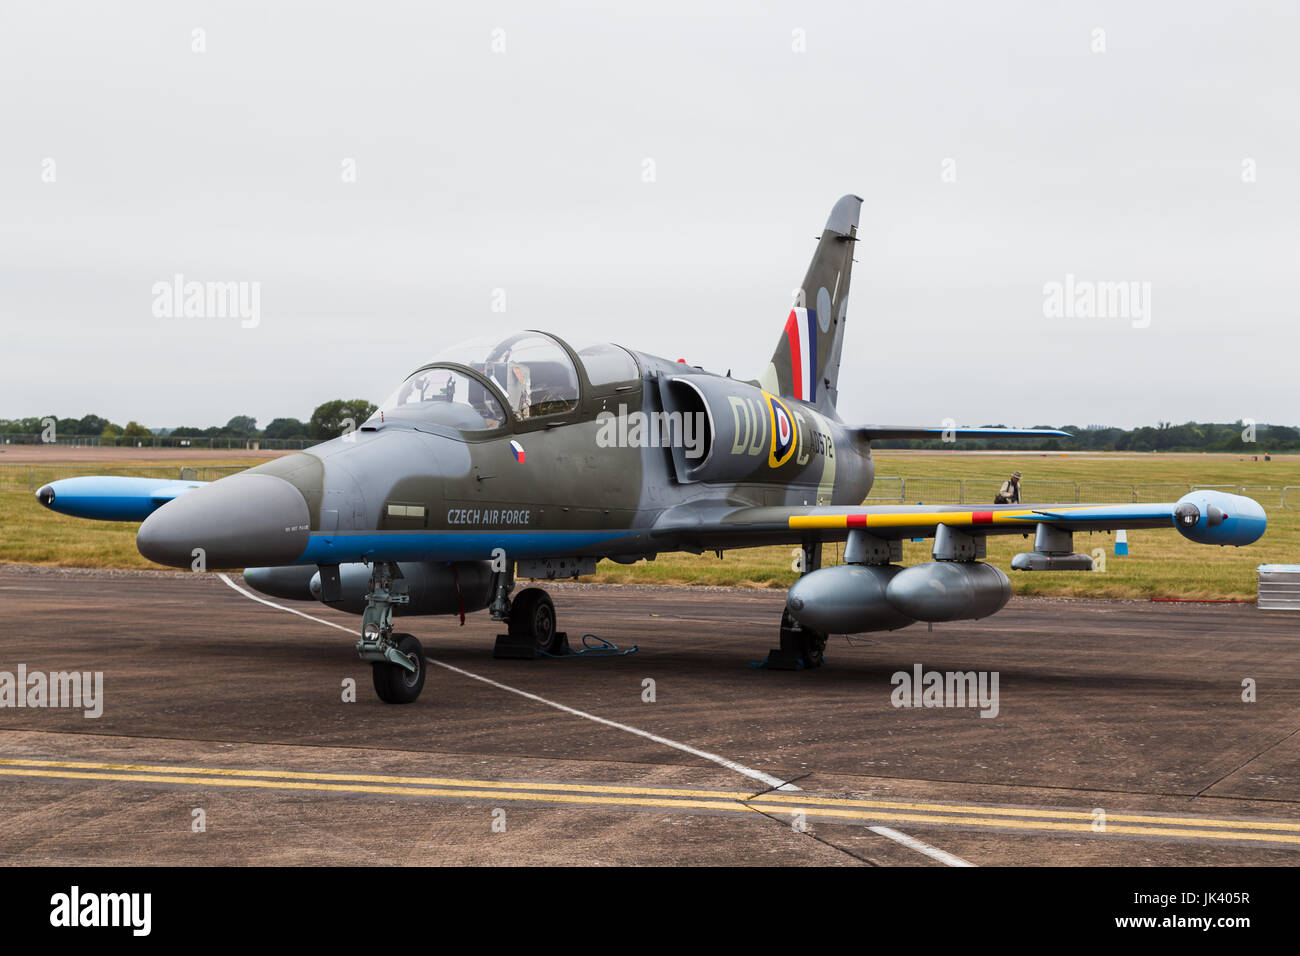 L-159 ALCA from the Czech Republic Air Force seen at the 2017 Royal International Air Tattoo at Royal Air Force Fairford in Gloucestershire - the larg Stock Photo